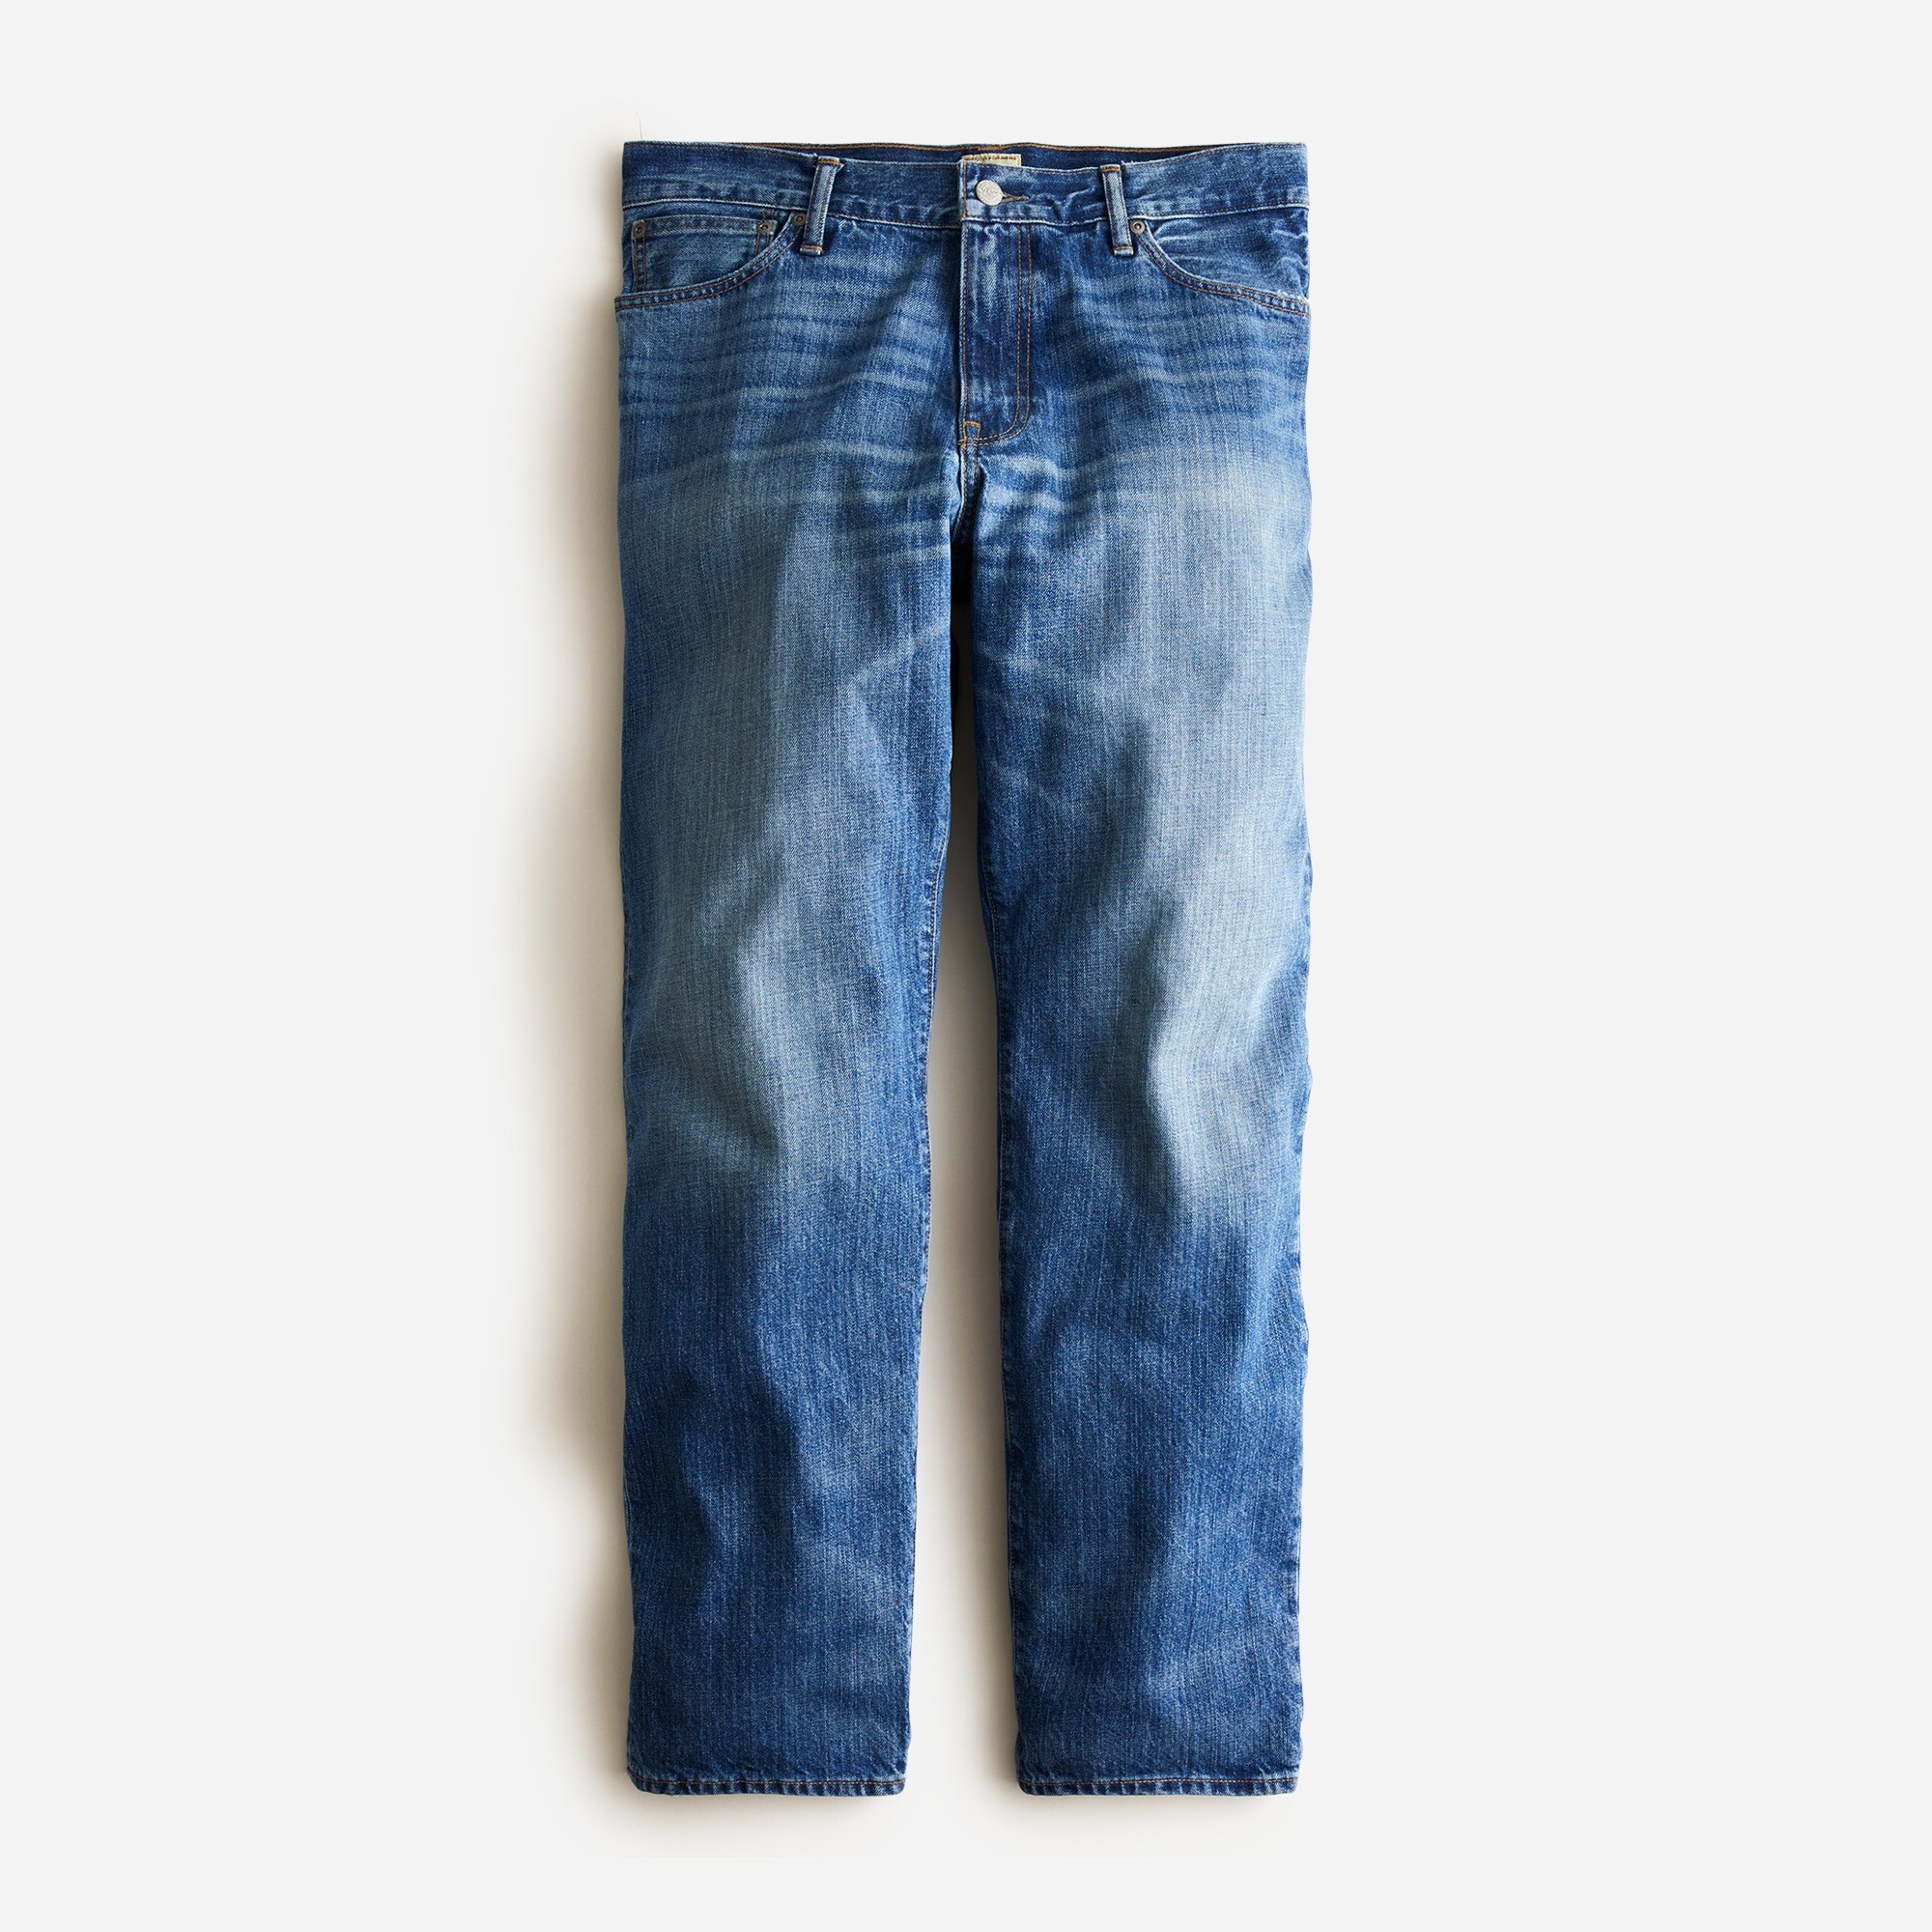  Classic Straight-fit jean in three-year wash